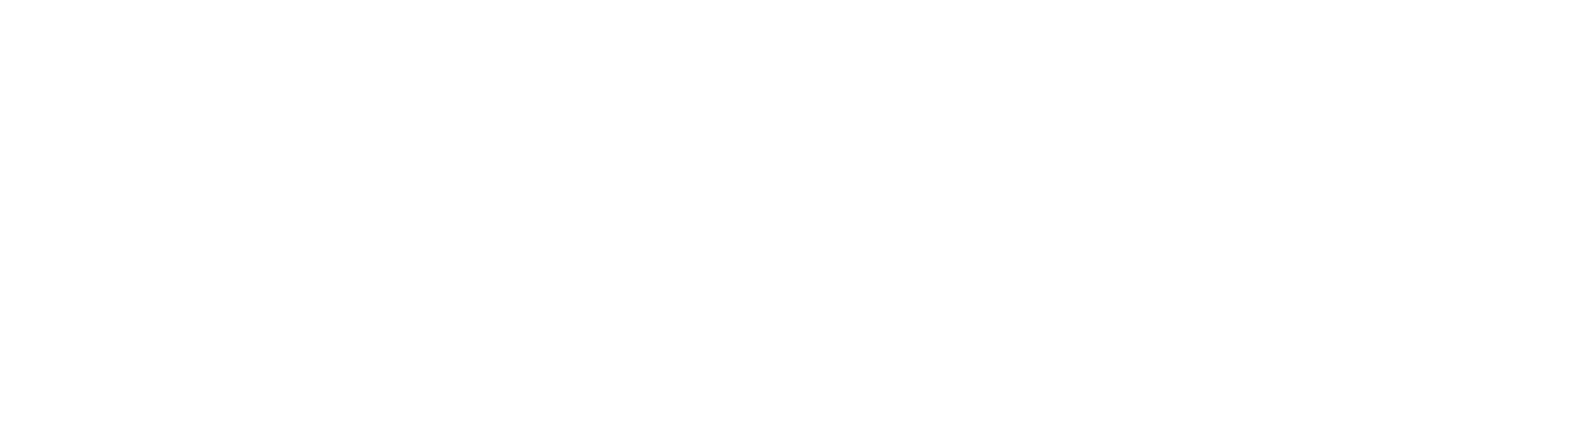 Bookkeeping Doctor Logo wide white